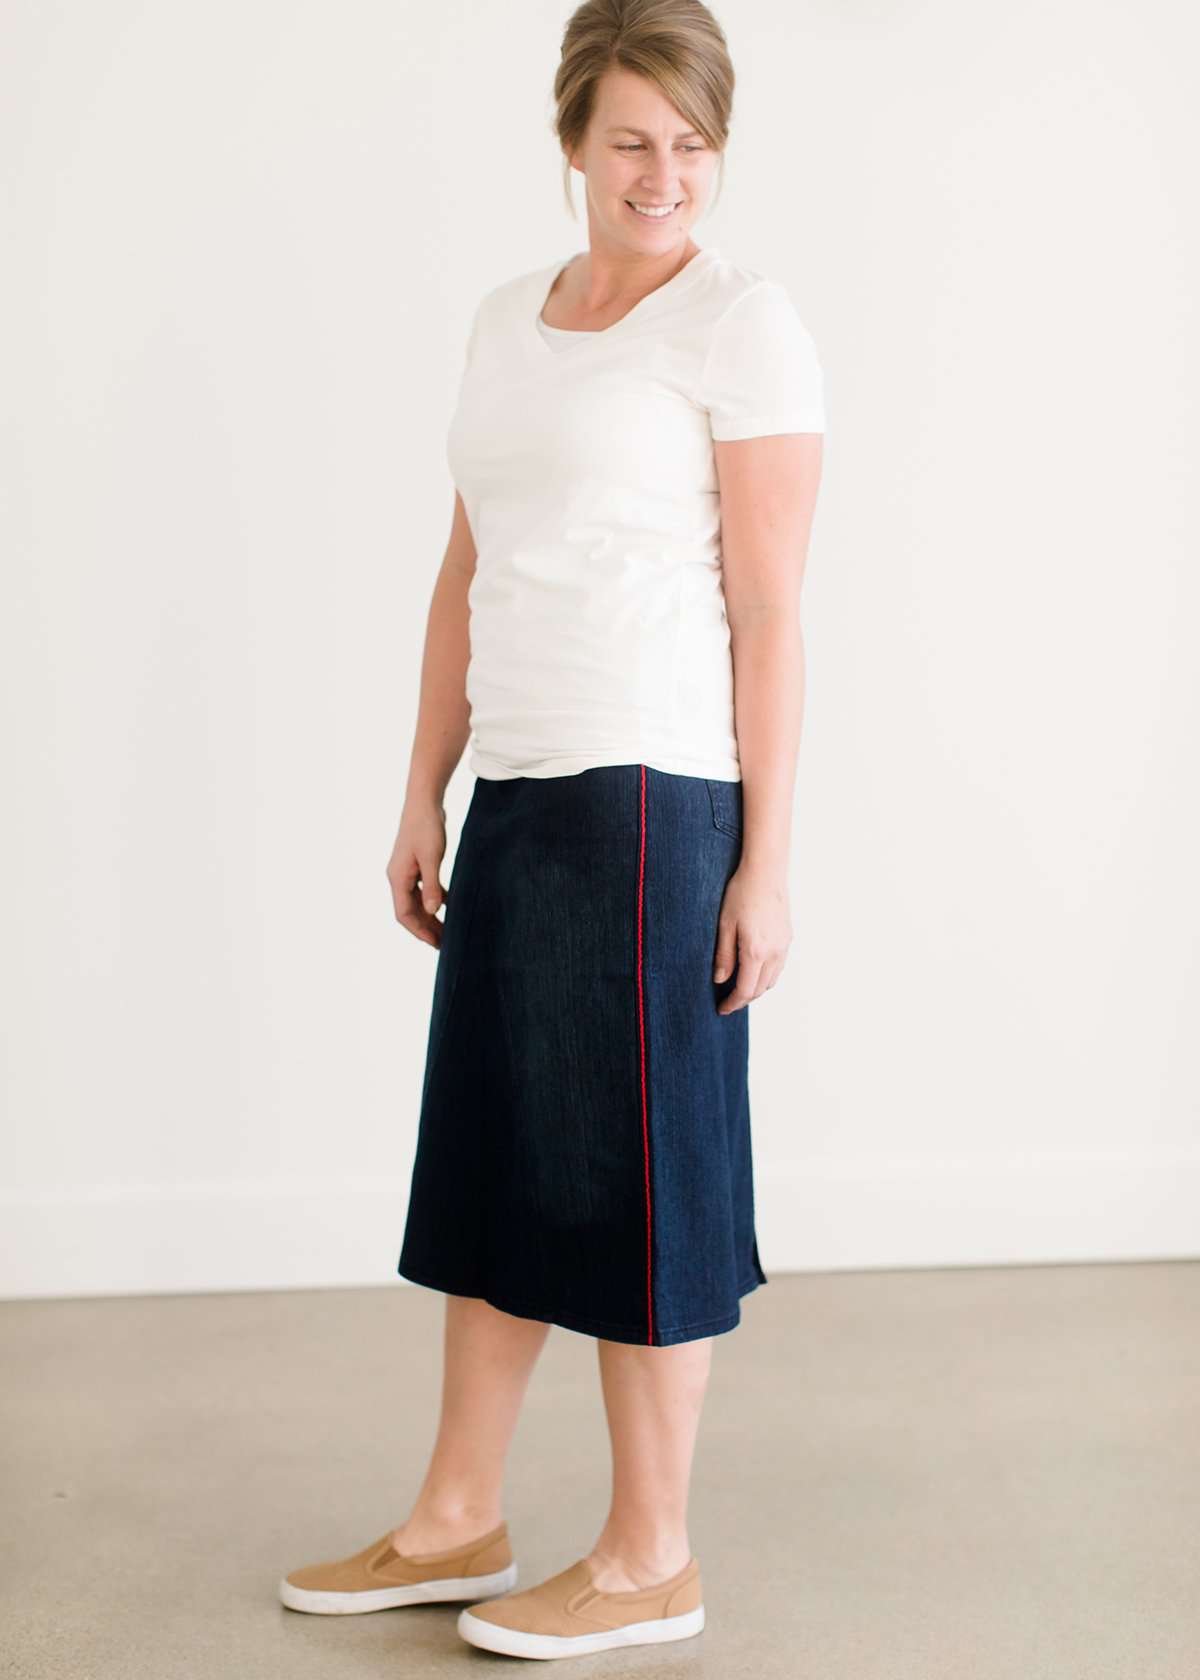 Woman wearing a dark indigo wash below the knee skirt that has red piping along the sides. She also is wearing a white tee shirt and tan sneakers.